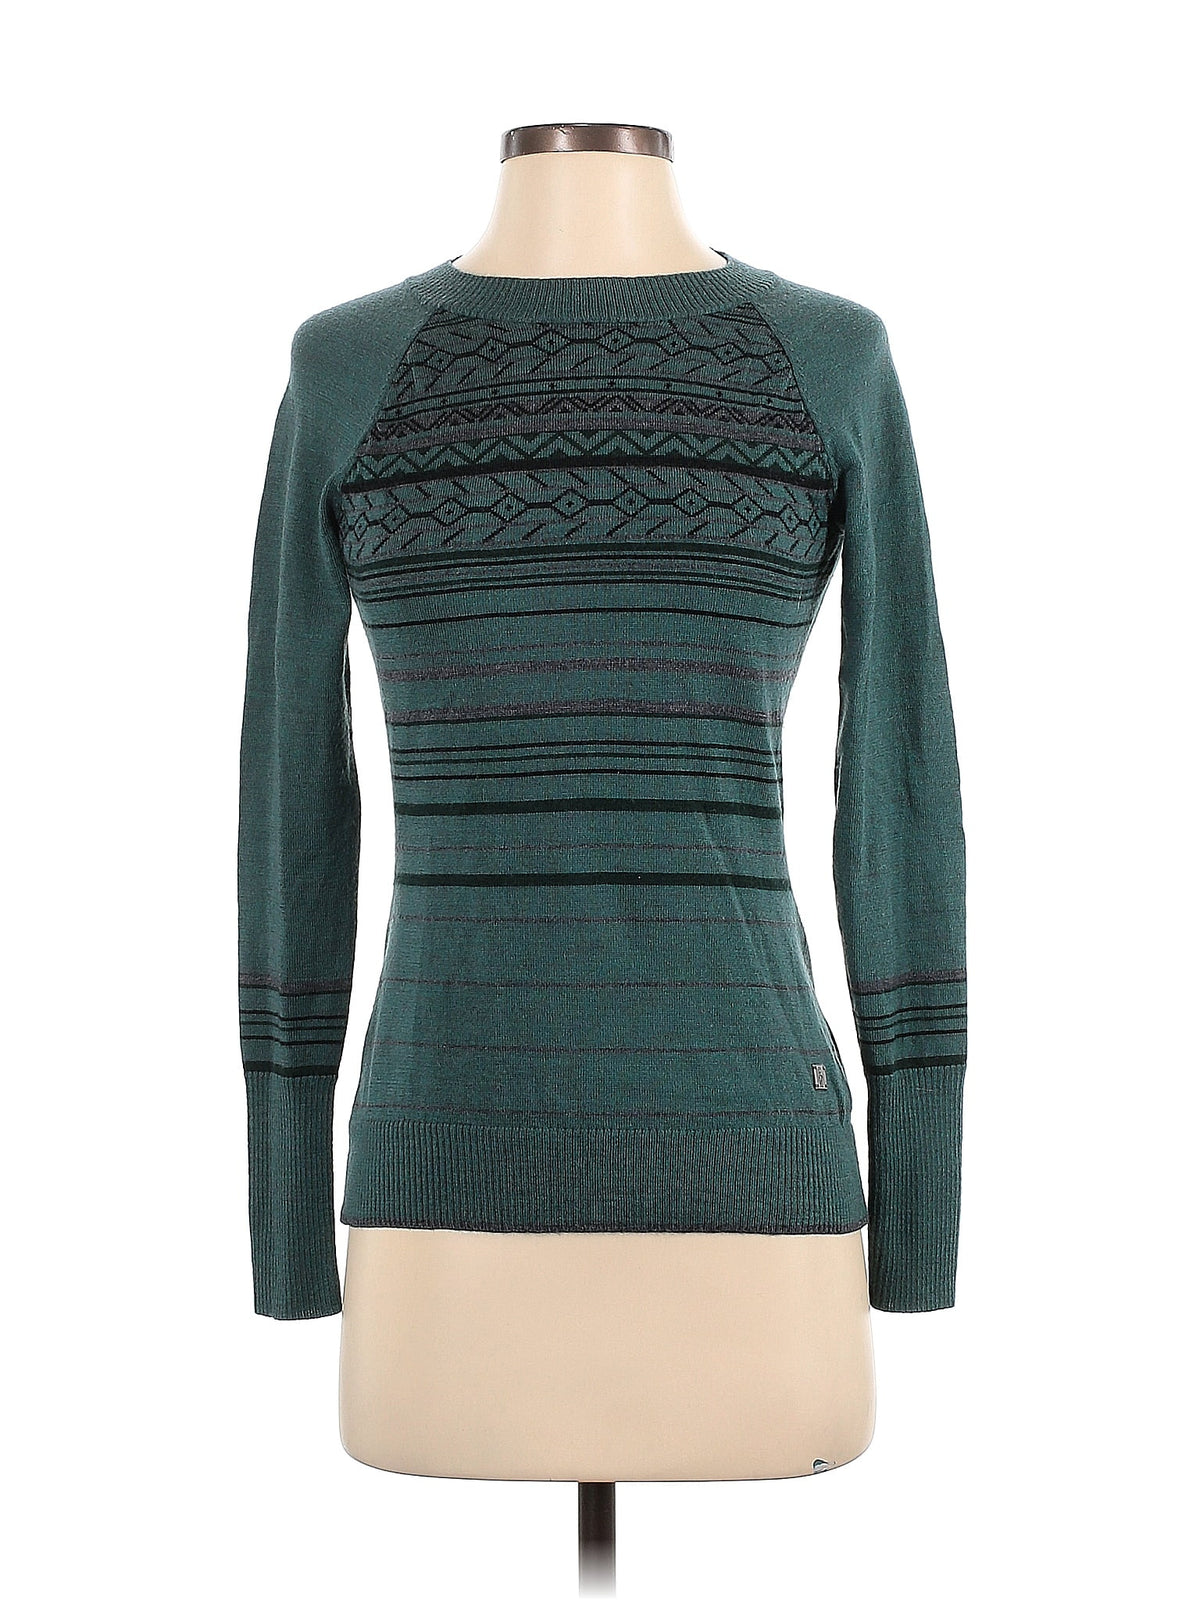 Wool Pullover Sweater size - S